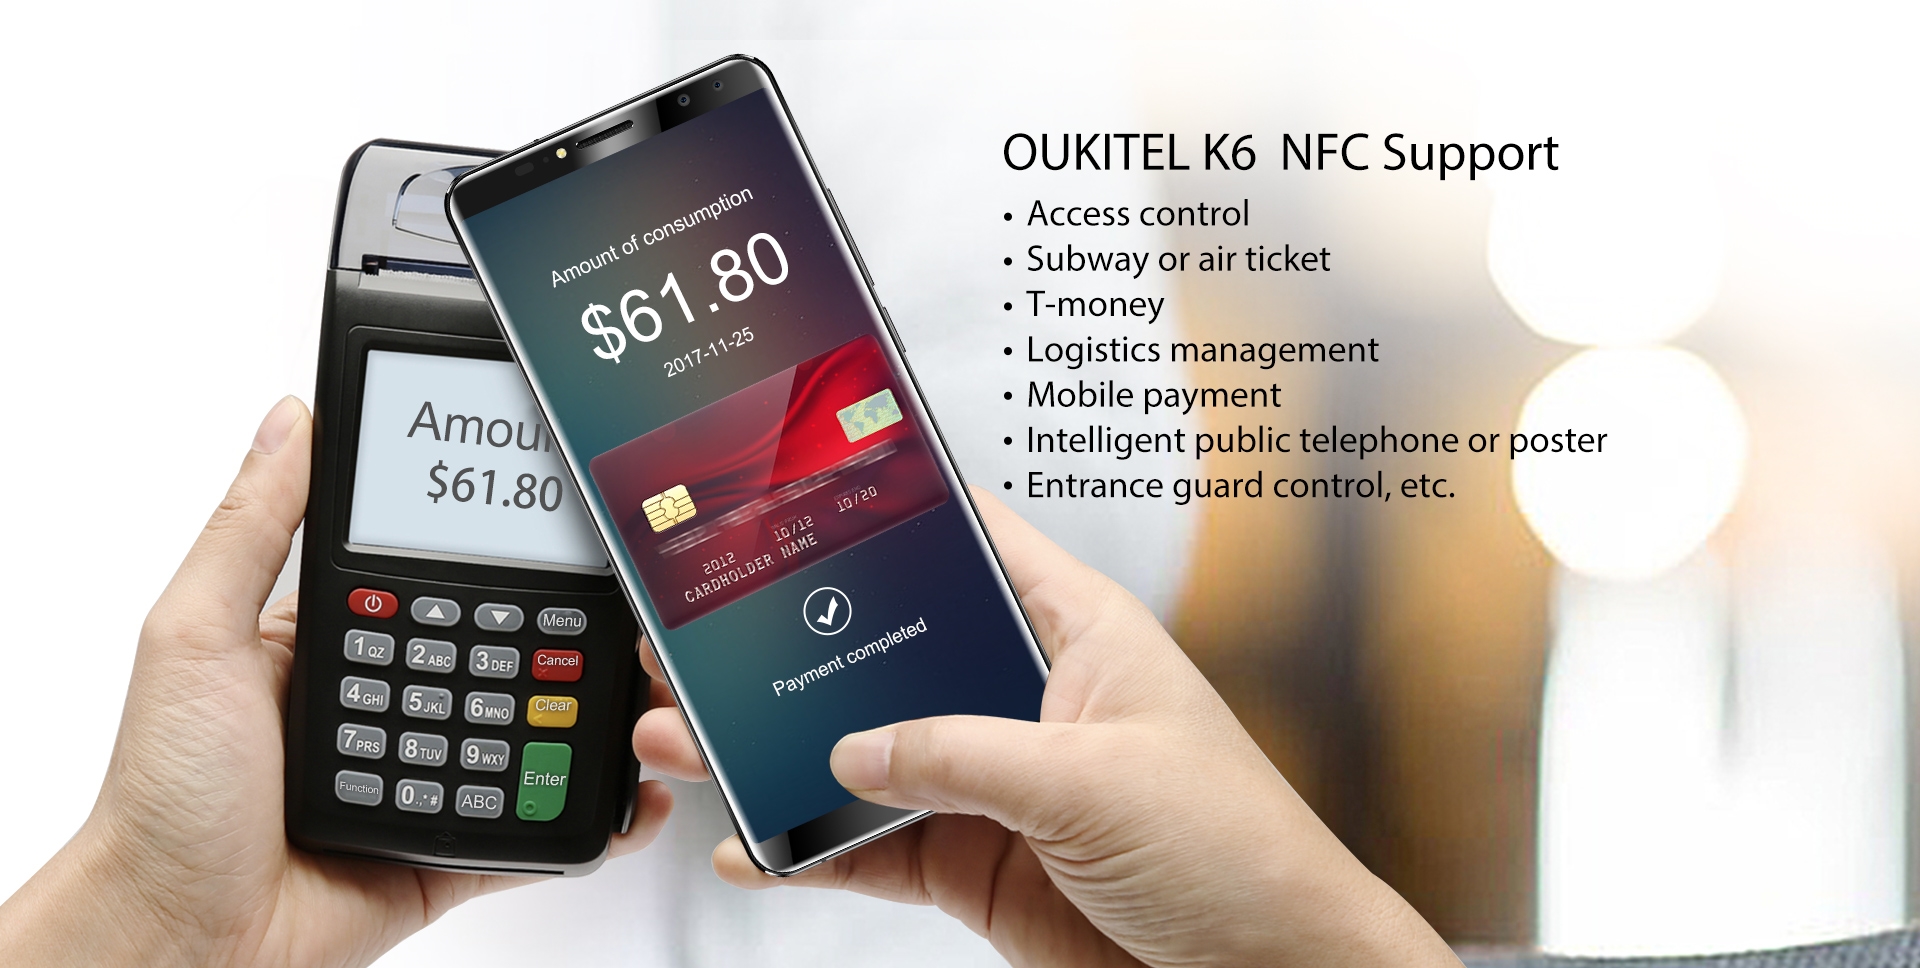 OUKITEL K6 Pre-orders Begin Next Week, Comes with Versatile NFC Function | DeviceDaily.com